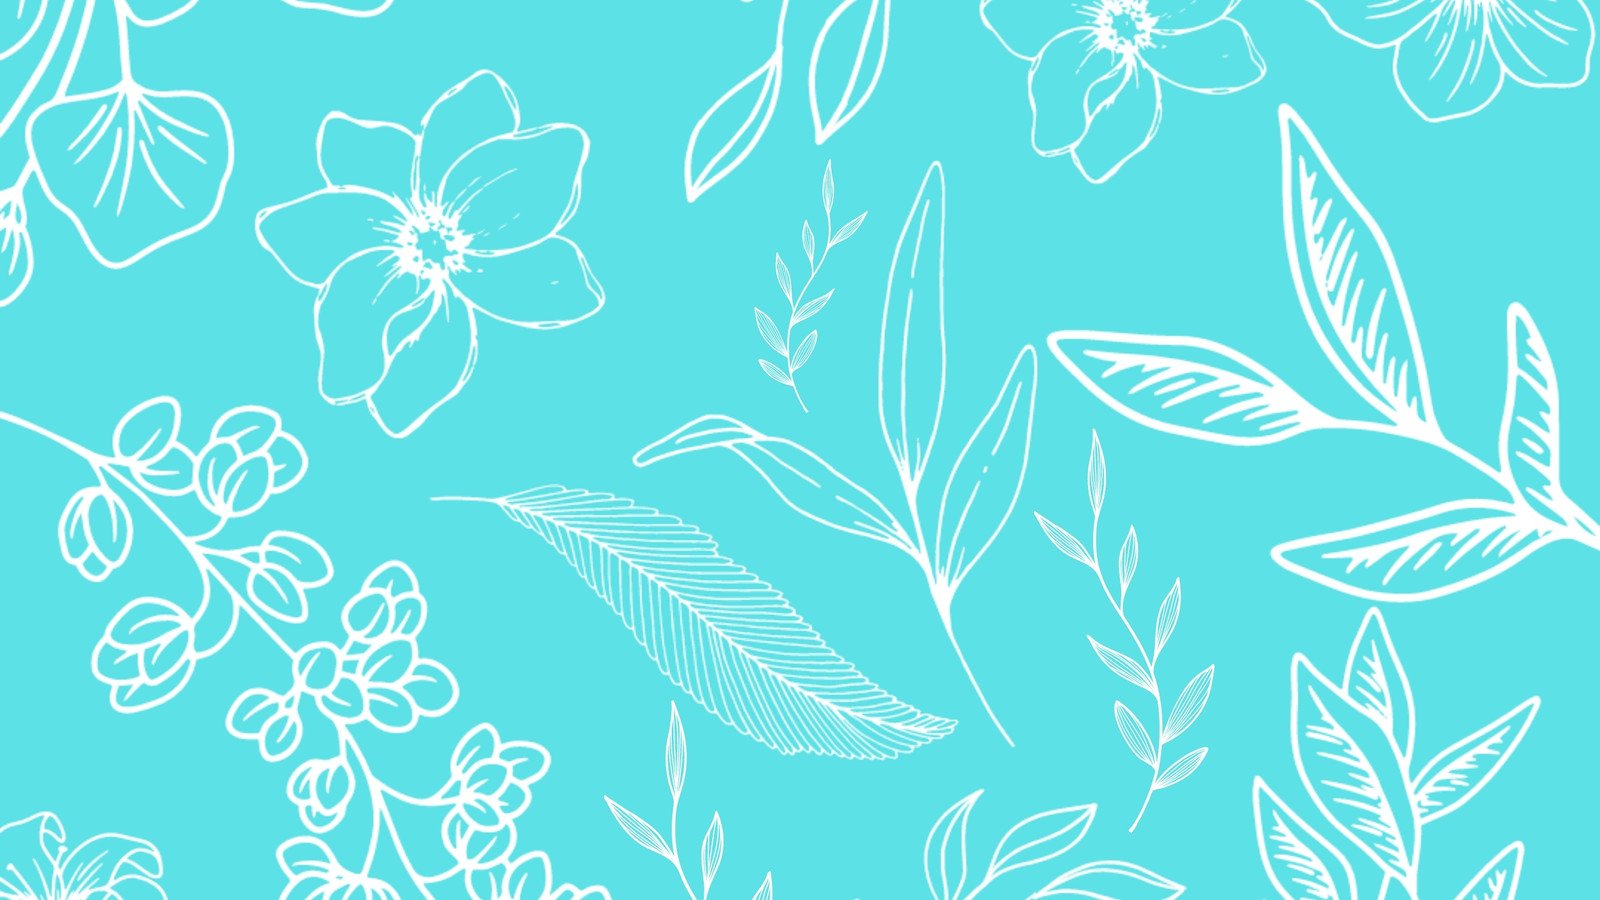 Page 3 - Free and customizable floral desktop wallpaper templates | Canva